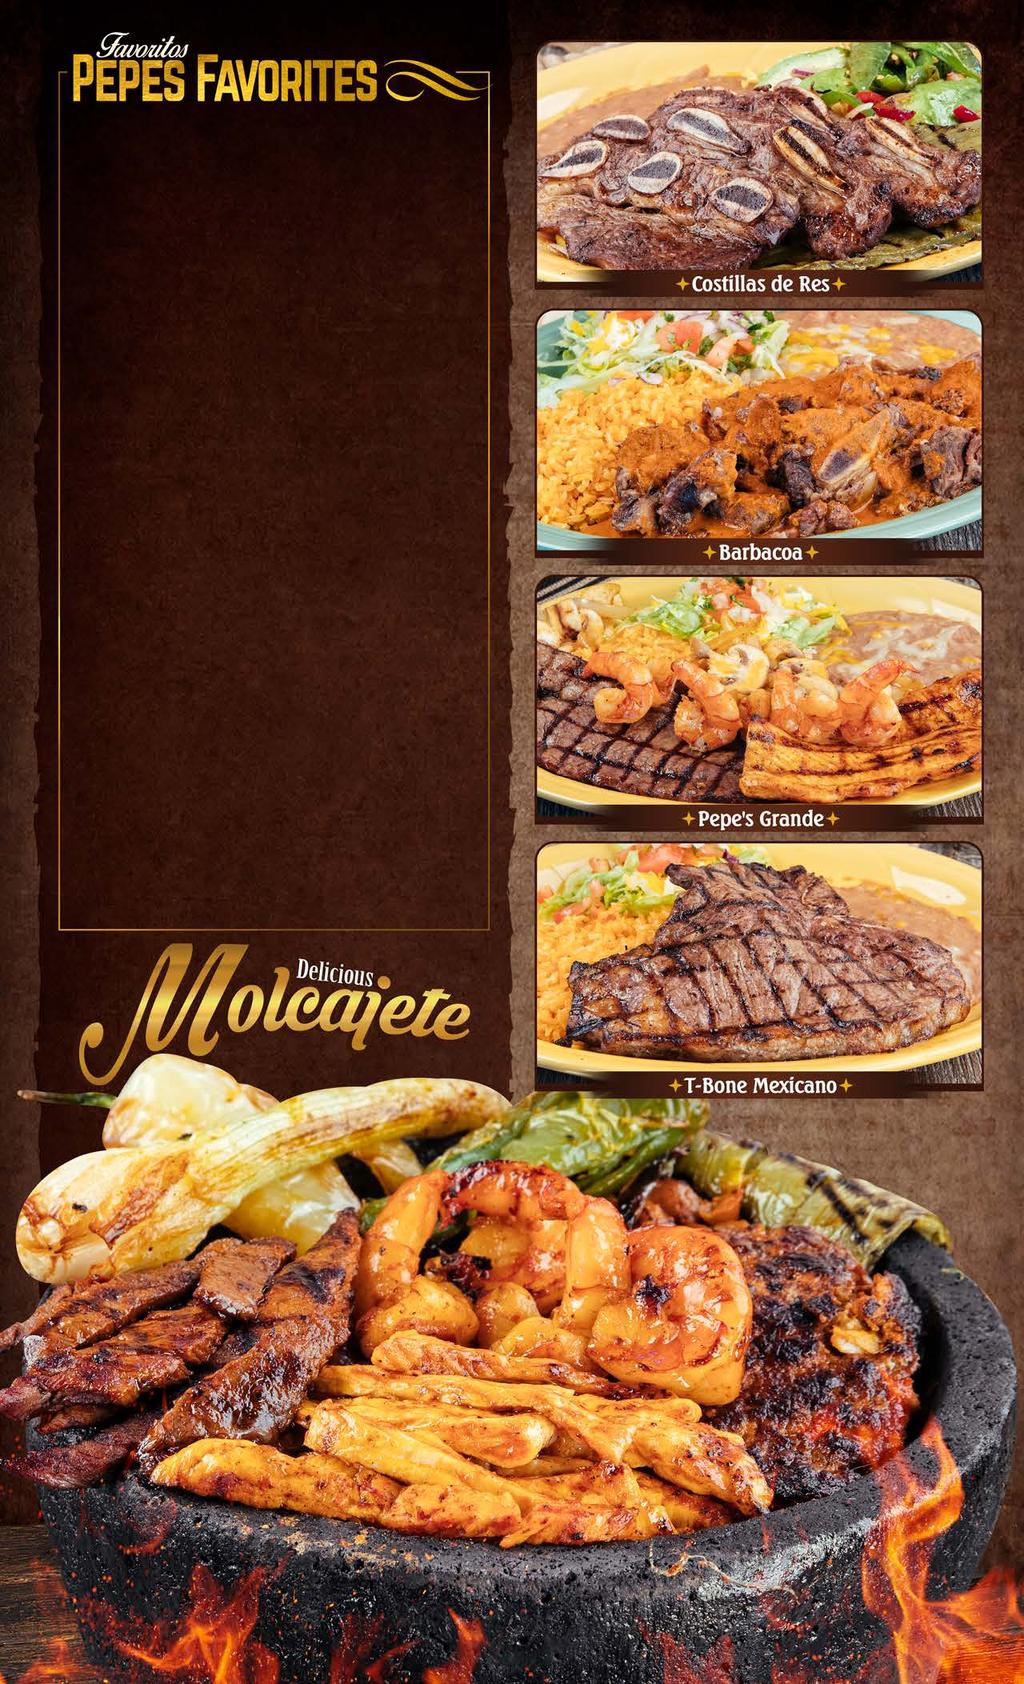 Meats are cooked to choice Para el Patron 16.99 For the Boss Carne asada cooked over the charcoal served with your choice of prawns diabla or mojo de ajo. Pepe s Grande 18.